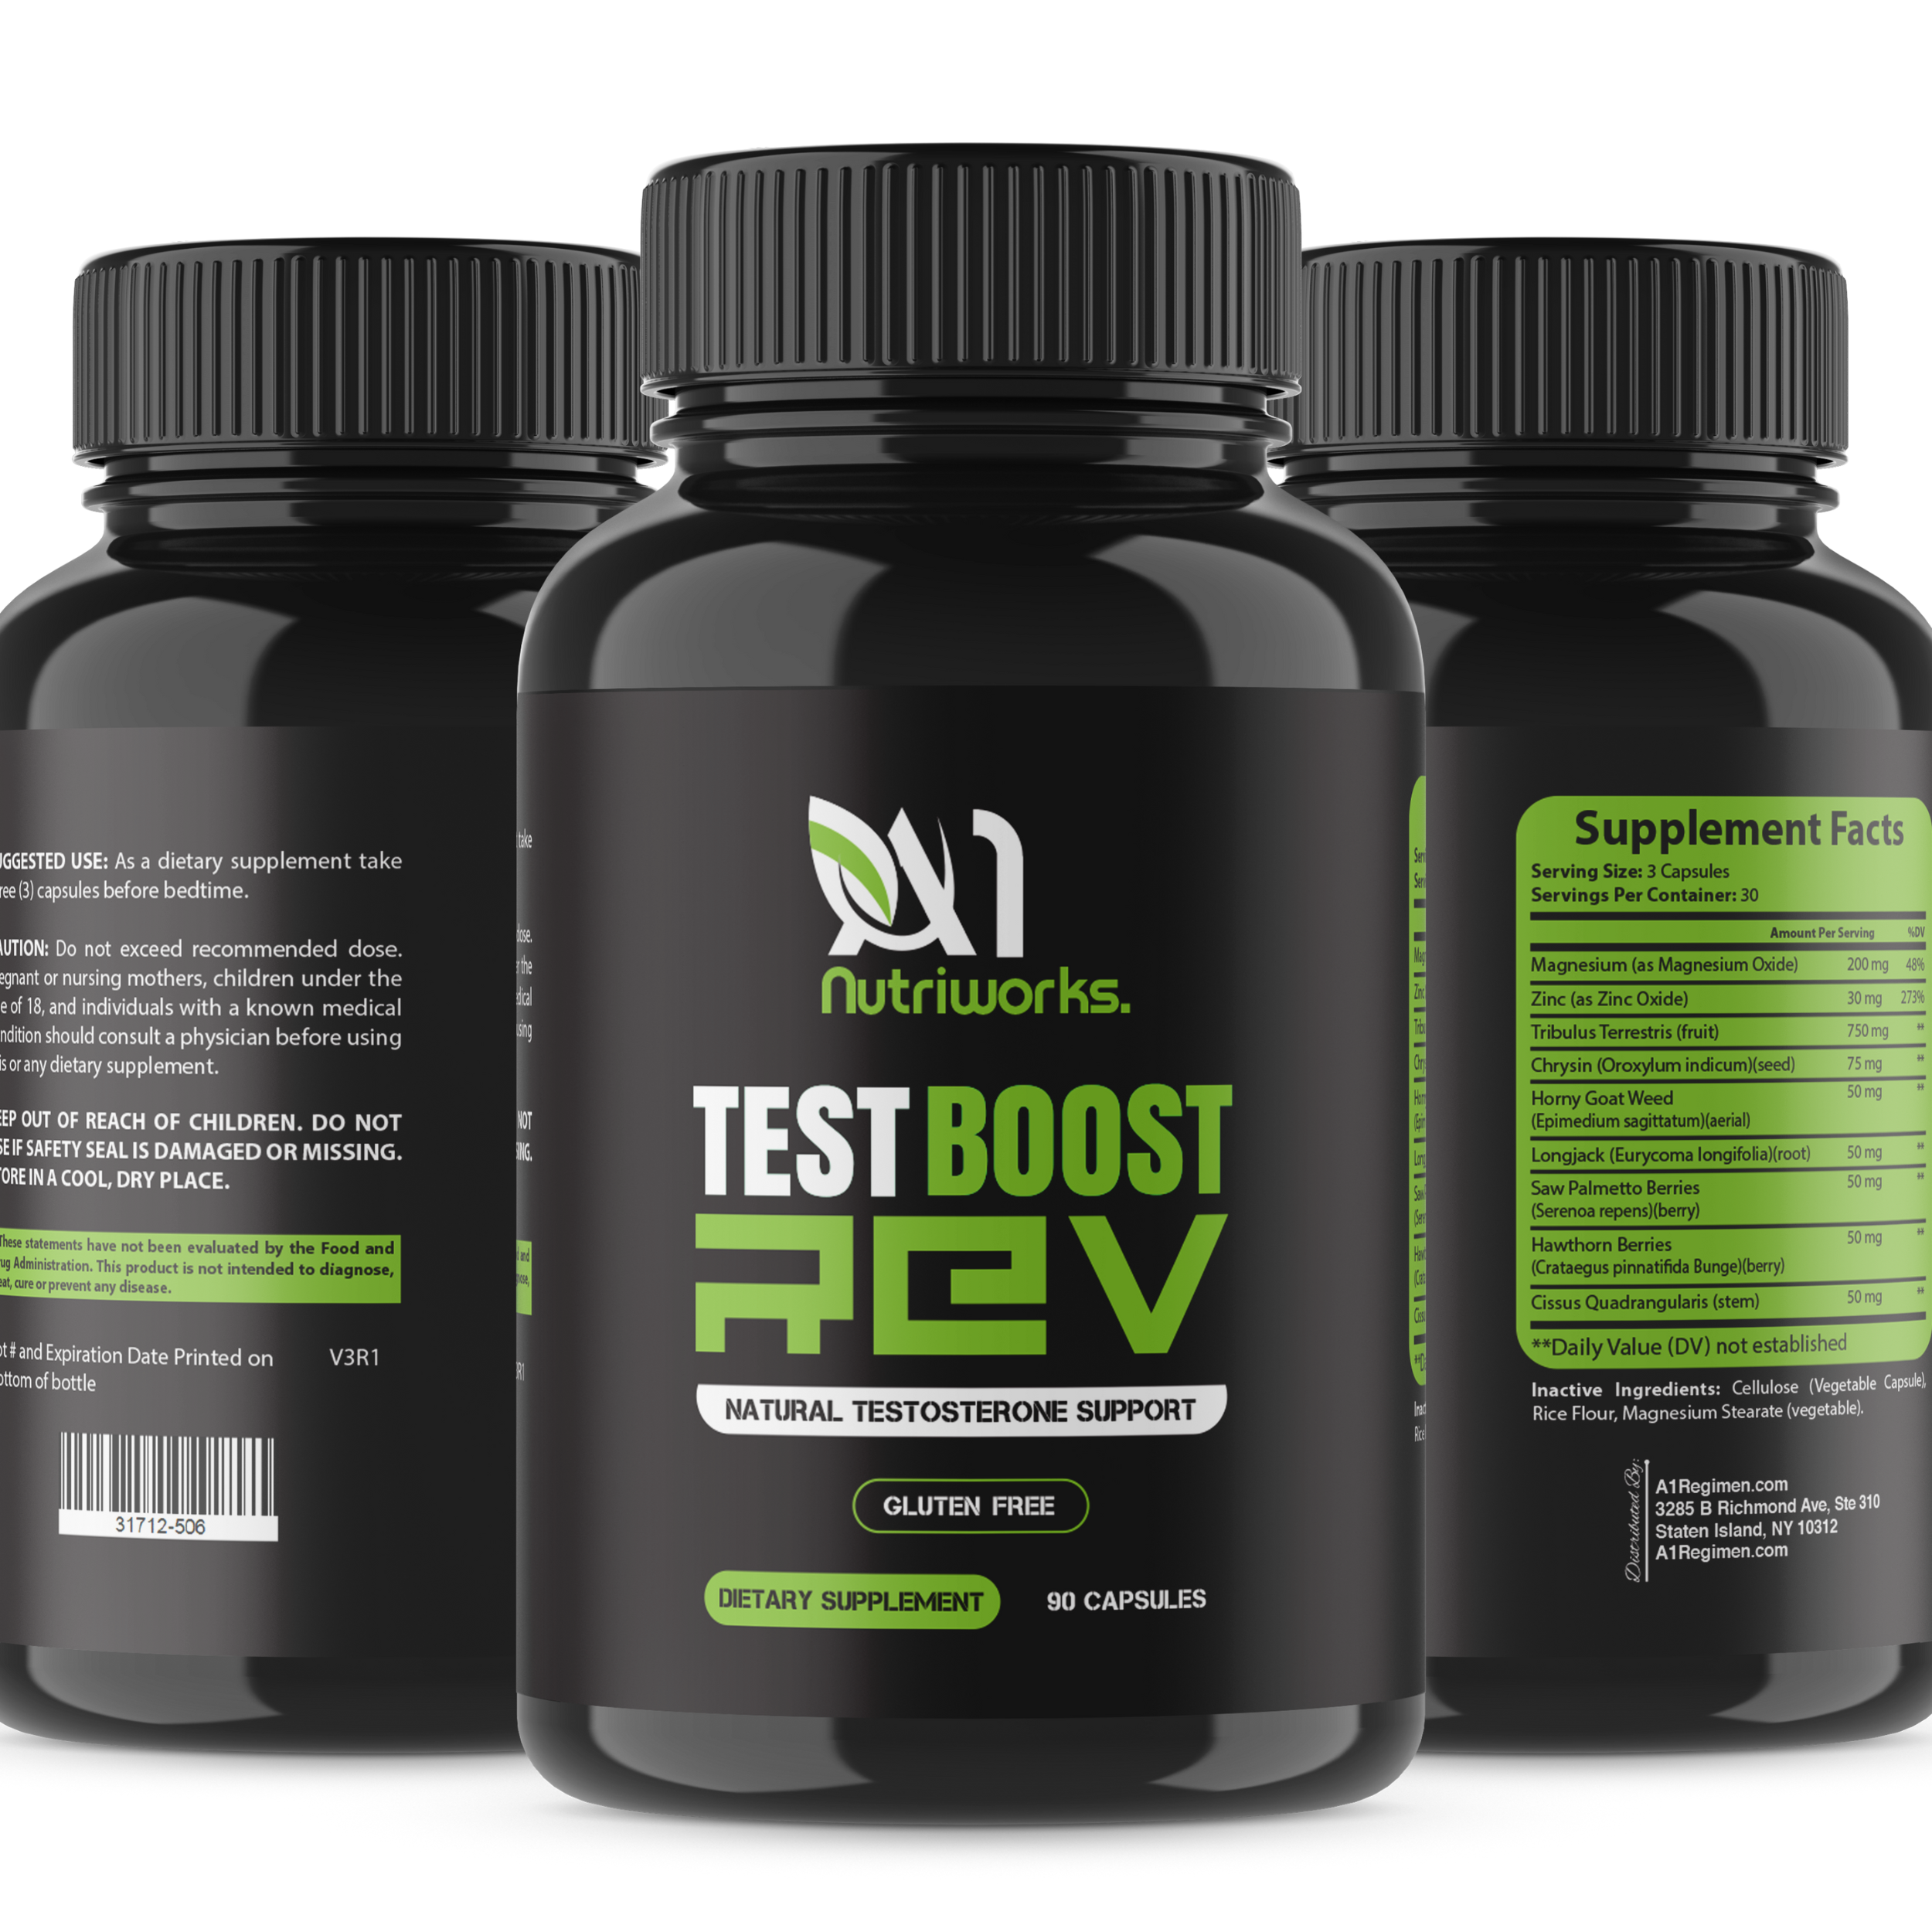 Test Boost Max REV -  2 Bottle Bundle - Maximum Performance Formula, Support Muscle and Strength